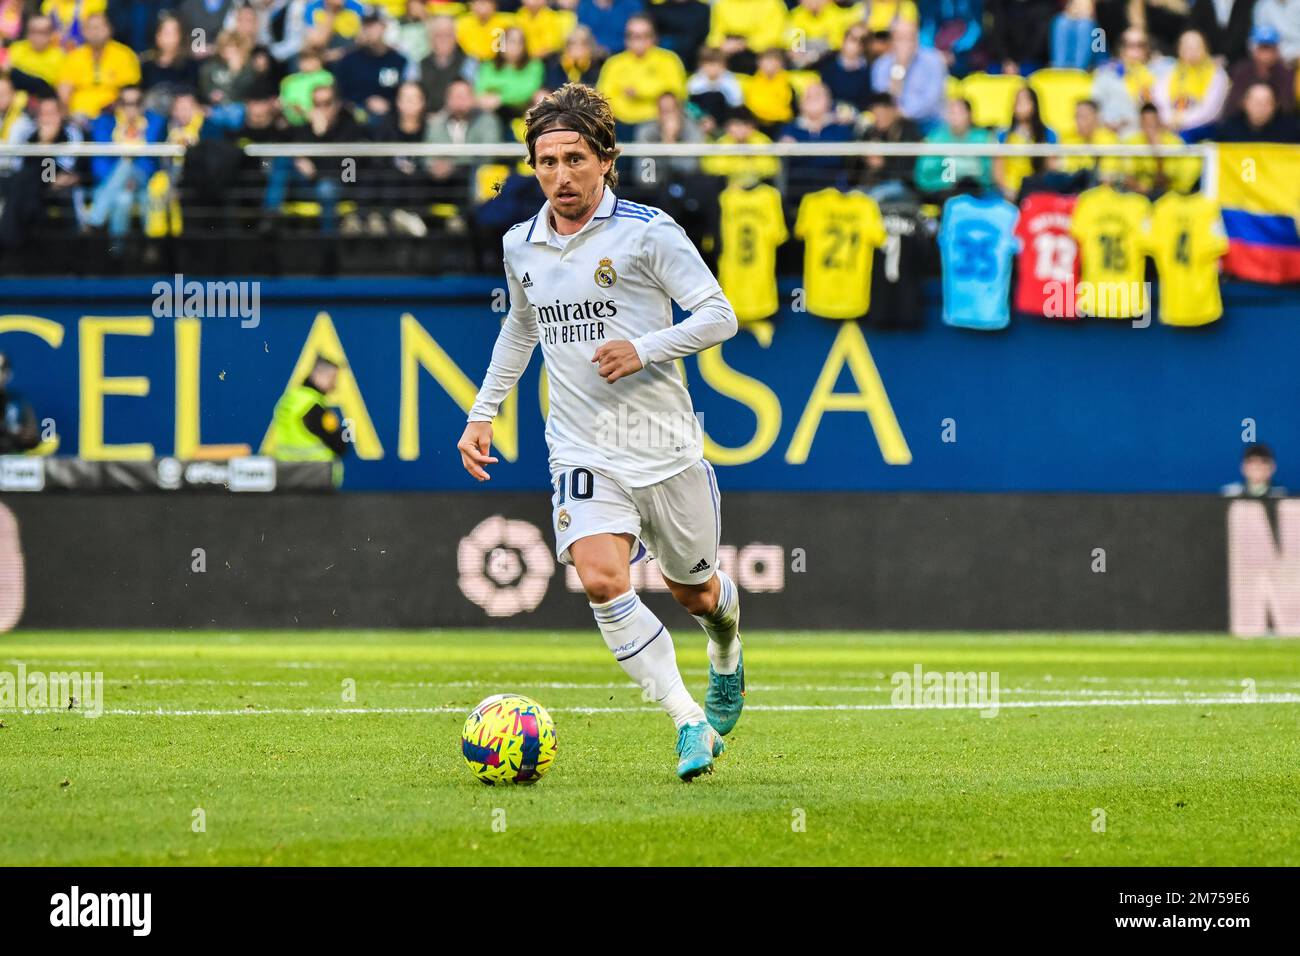 VILLARREAL, SPAIN - JANUARY 7: Luka Modric of Real Madrid CF control the ball during the match between Villarreal CF and Real Madrid CF of La Liga Santander on January 7, 2023 at Estadi de la Ceramica in Villarreal, Spain. (Photo by Samuel Carreño/ PX Images) Credit: Px Images/Alamy Live News Stock Photo